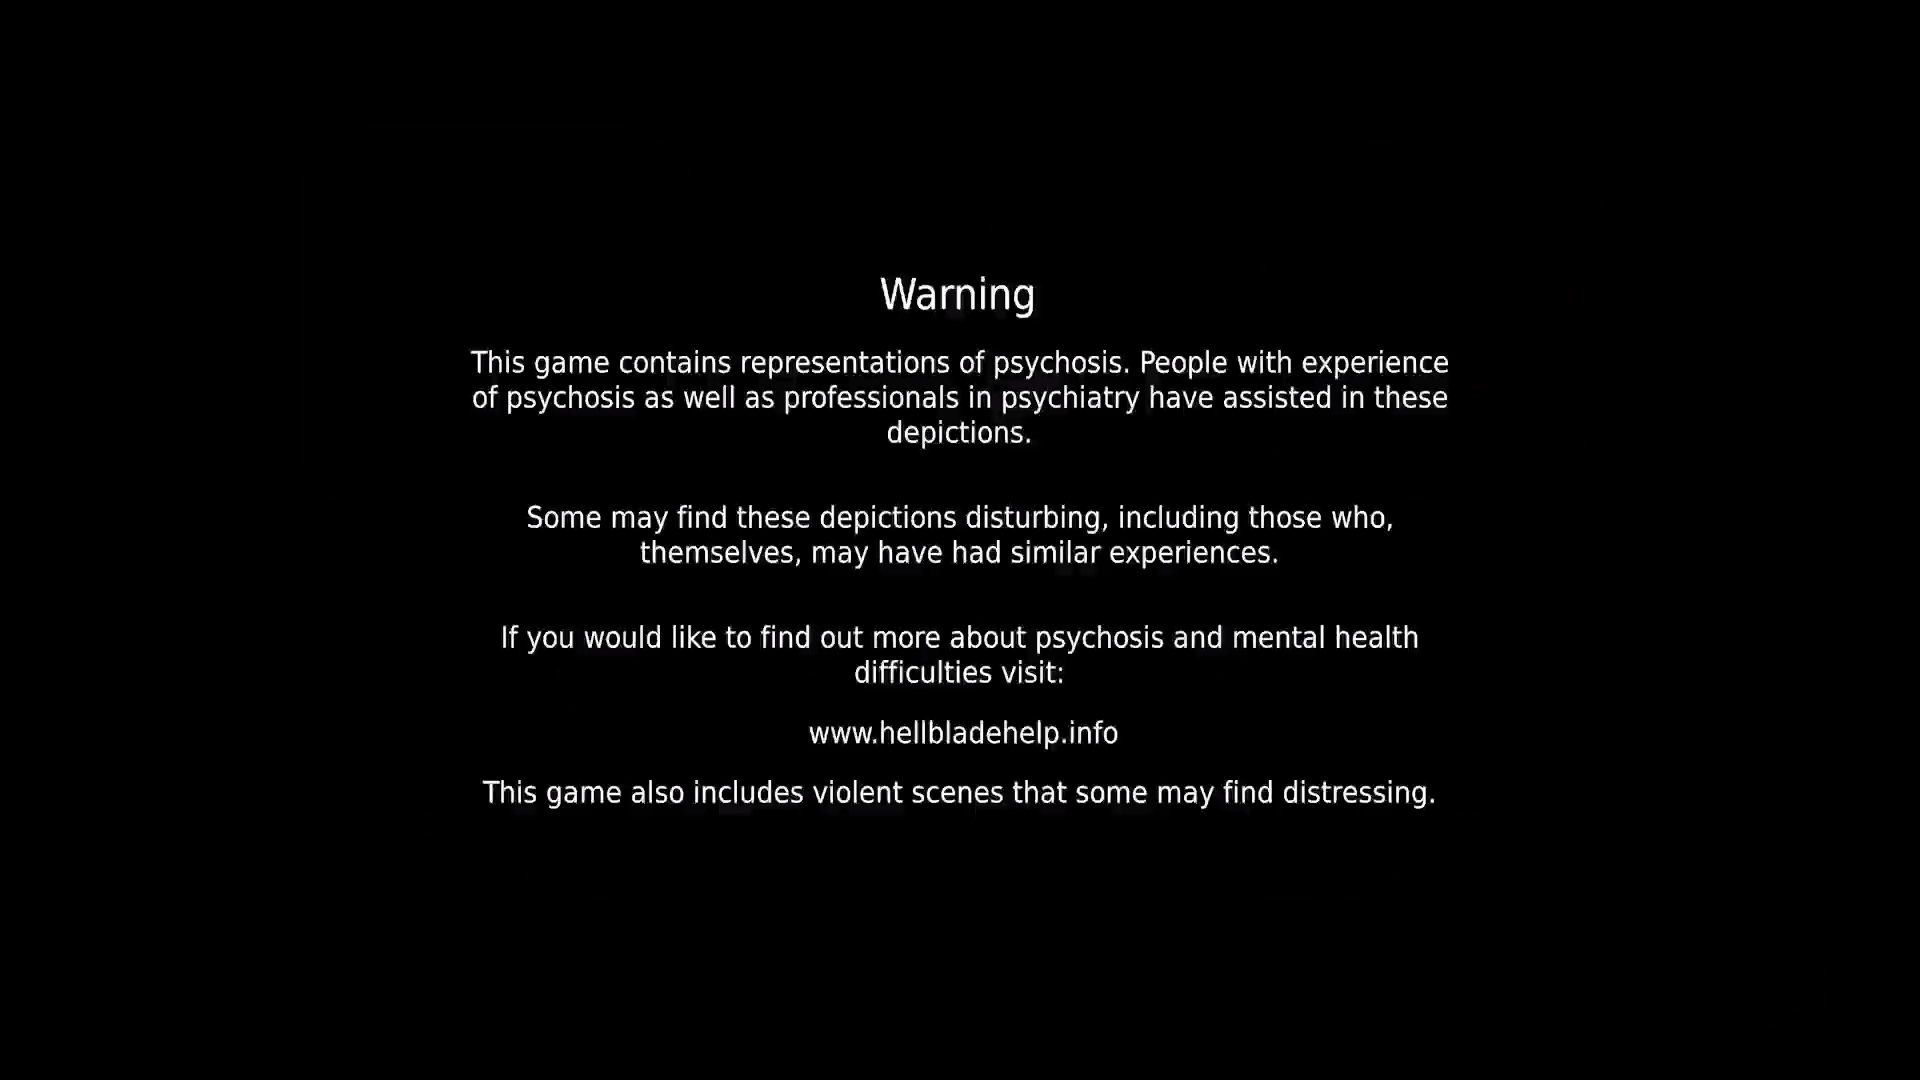 A screenshot from Hellblade Senua's Sacrifice with a warning screen that states, "This game contains representations of psychosis. People with experience of psychosis as well as professionals in psychiatry have assisted in these depictions. Some may find these depictions disturbing, including those who, themselves, may have had similar experiences. If you would like to find out more about psychosis and mental health difficulties visit: www.HellBladeHelp.info. This game also includes violent scenes that some may find distressing.